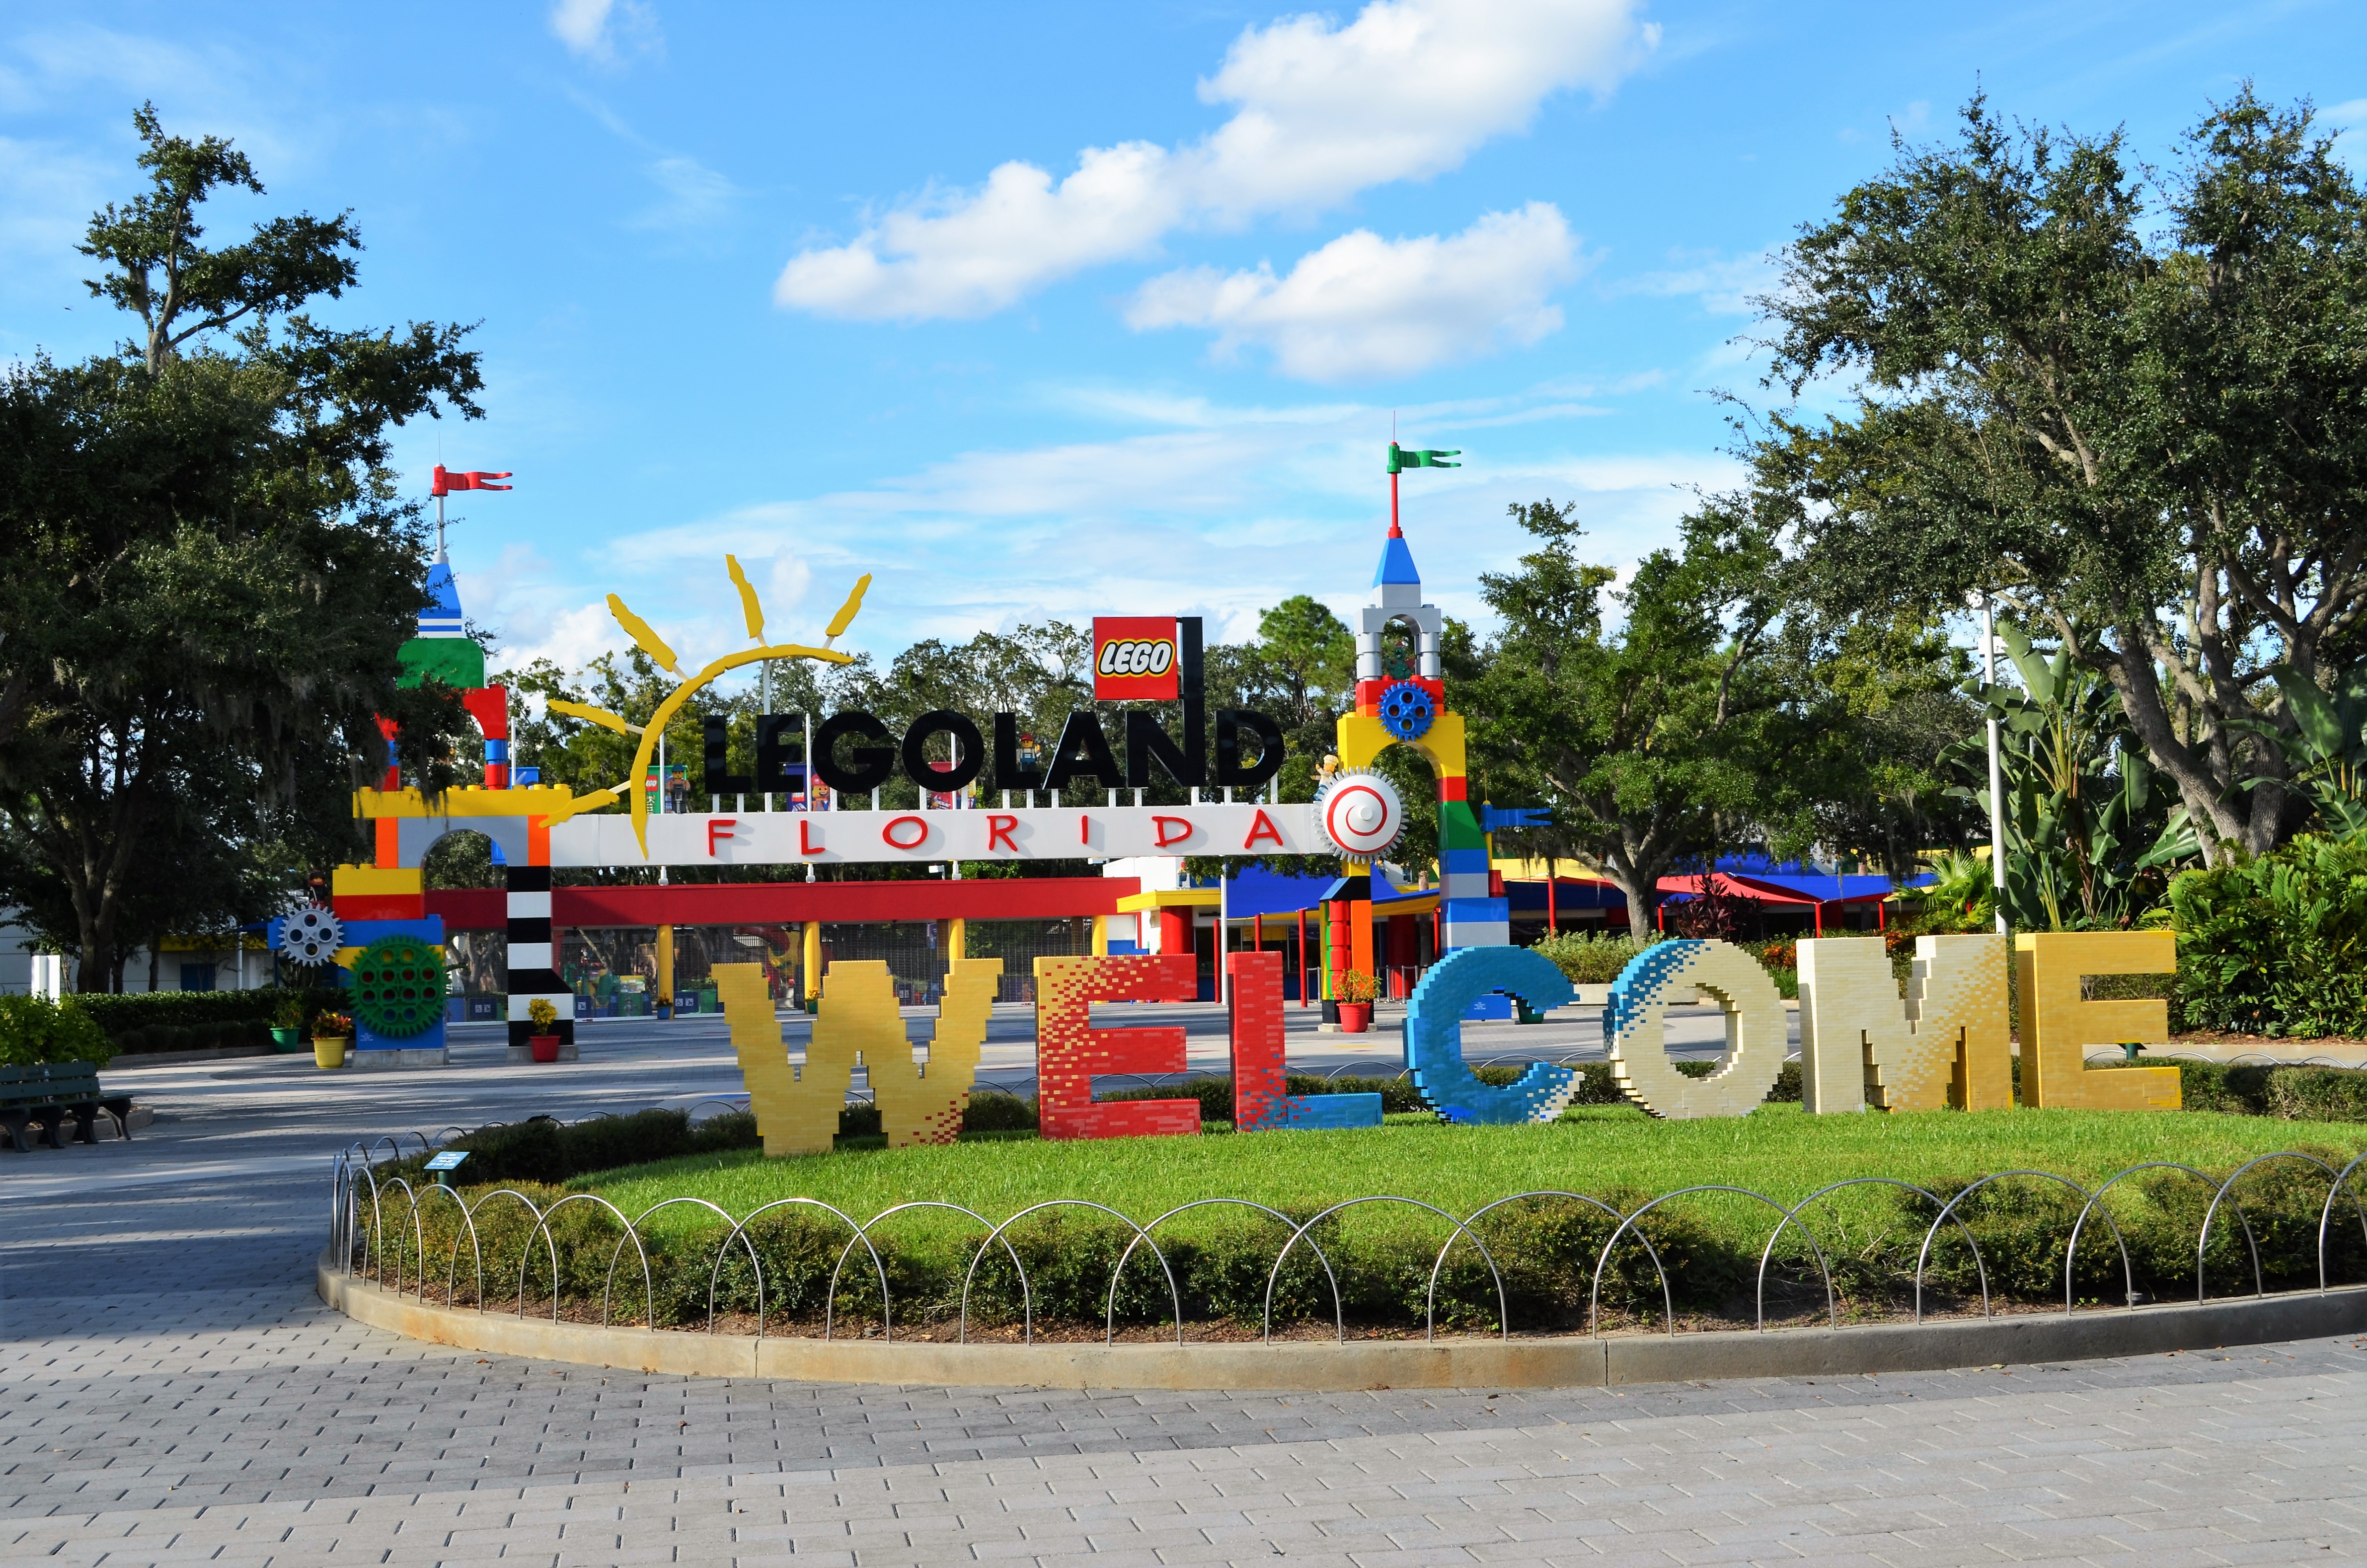 Legoland Florida: Winter Haven's Biggest Commercial Resident | The ...